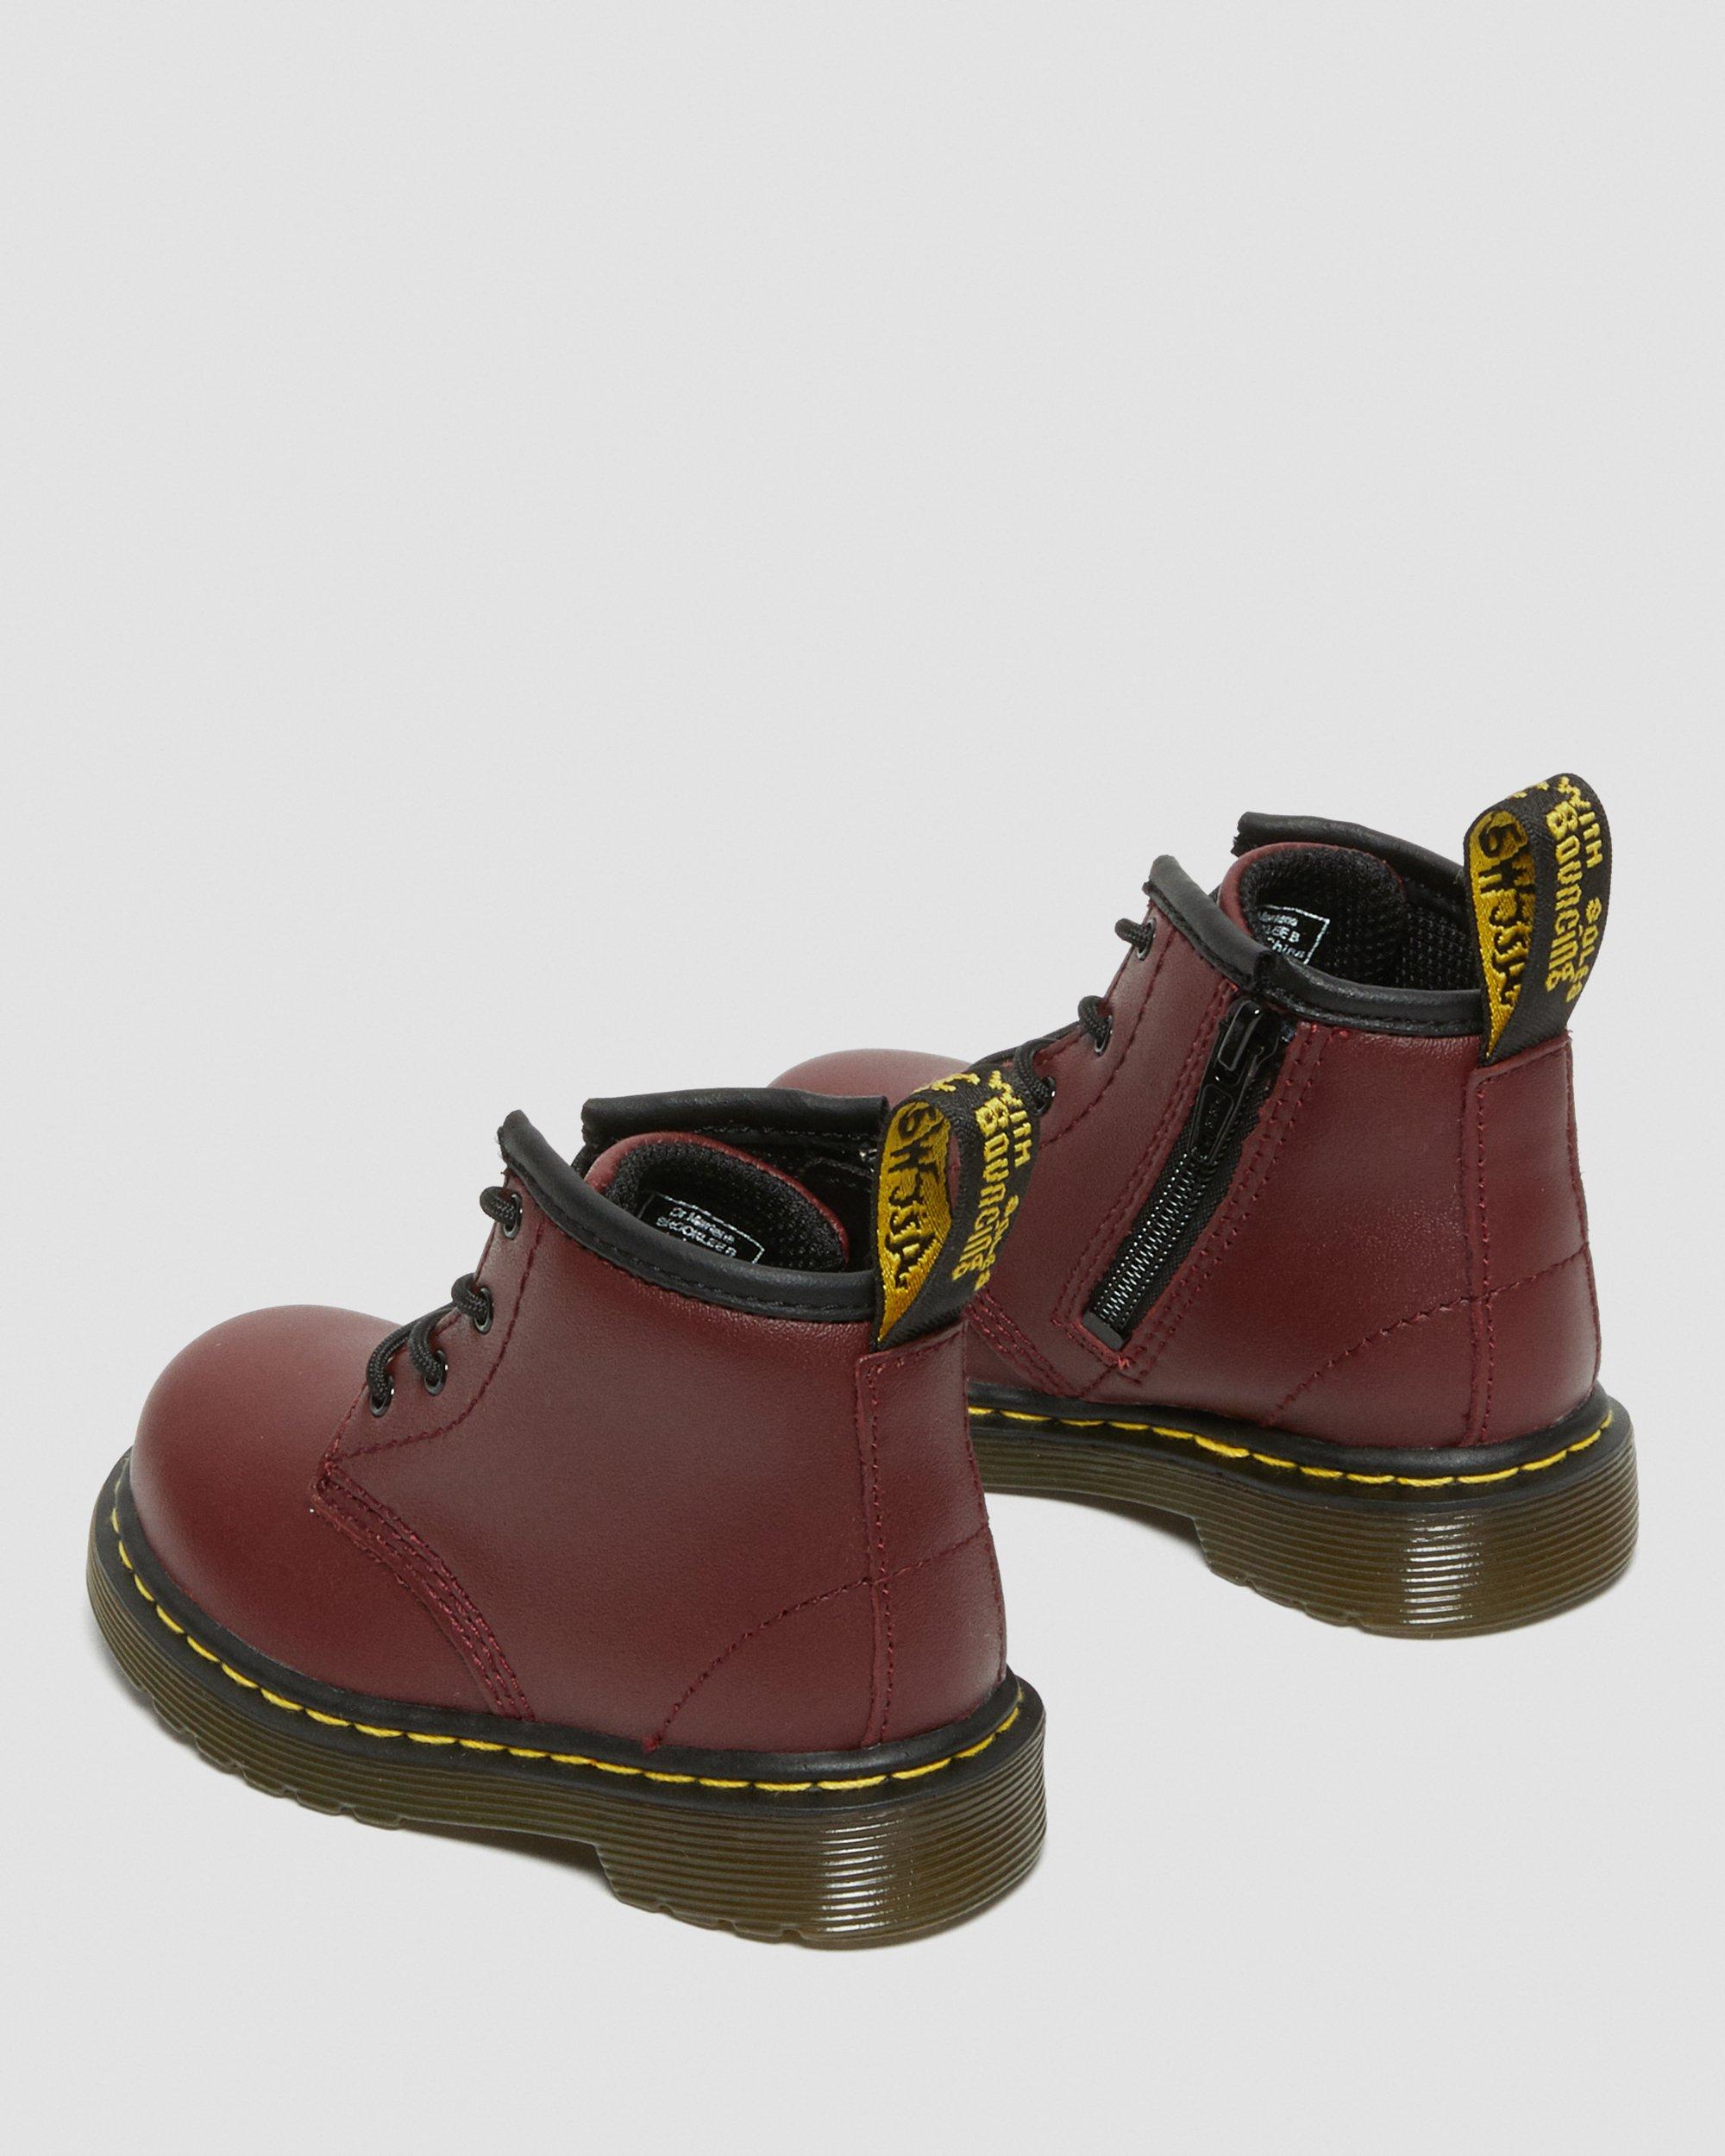 Infant 1460 Softy T Leather Ankle Boots in Cherry Red